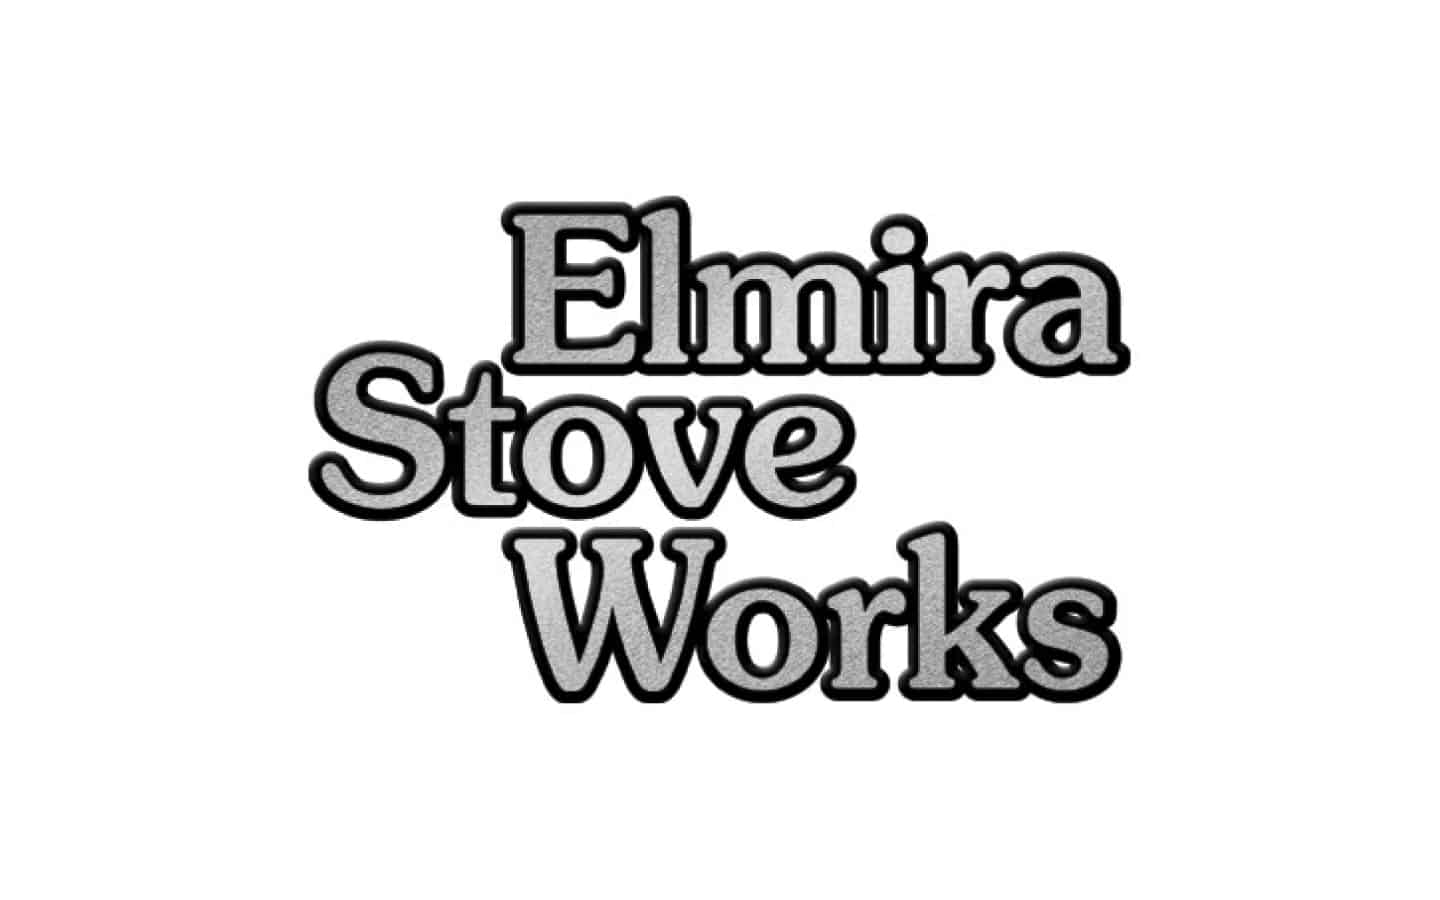 Elmira Stove Works provides “Ambassador” donations to hospitals in Windsor and Detroit